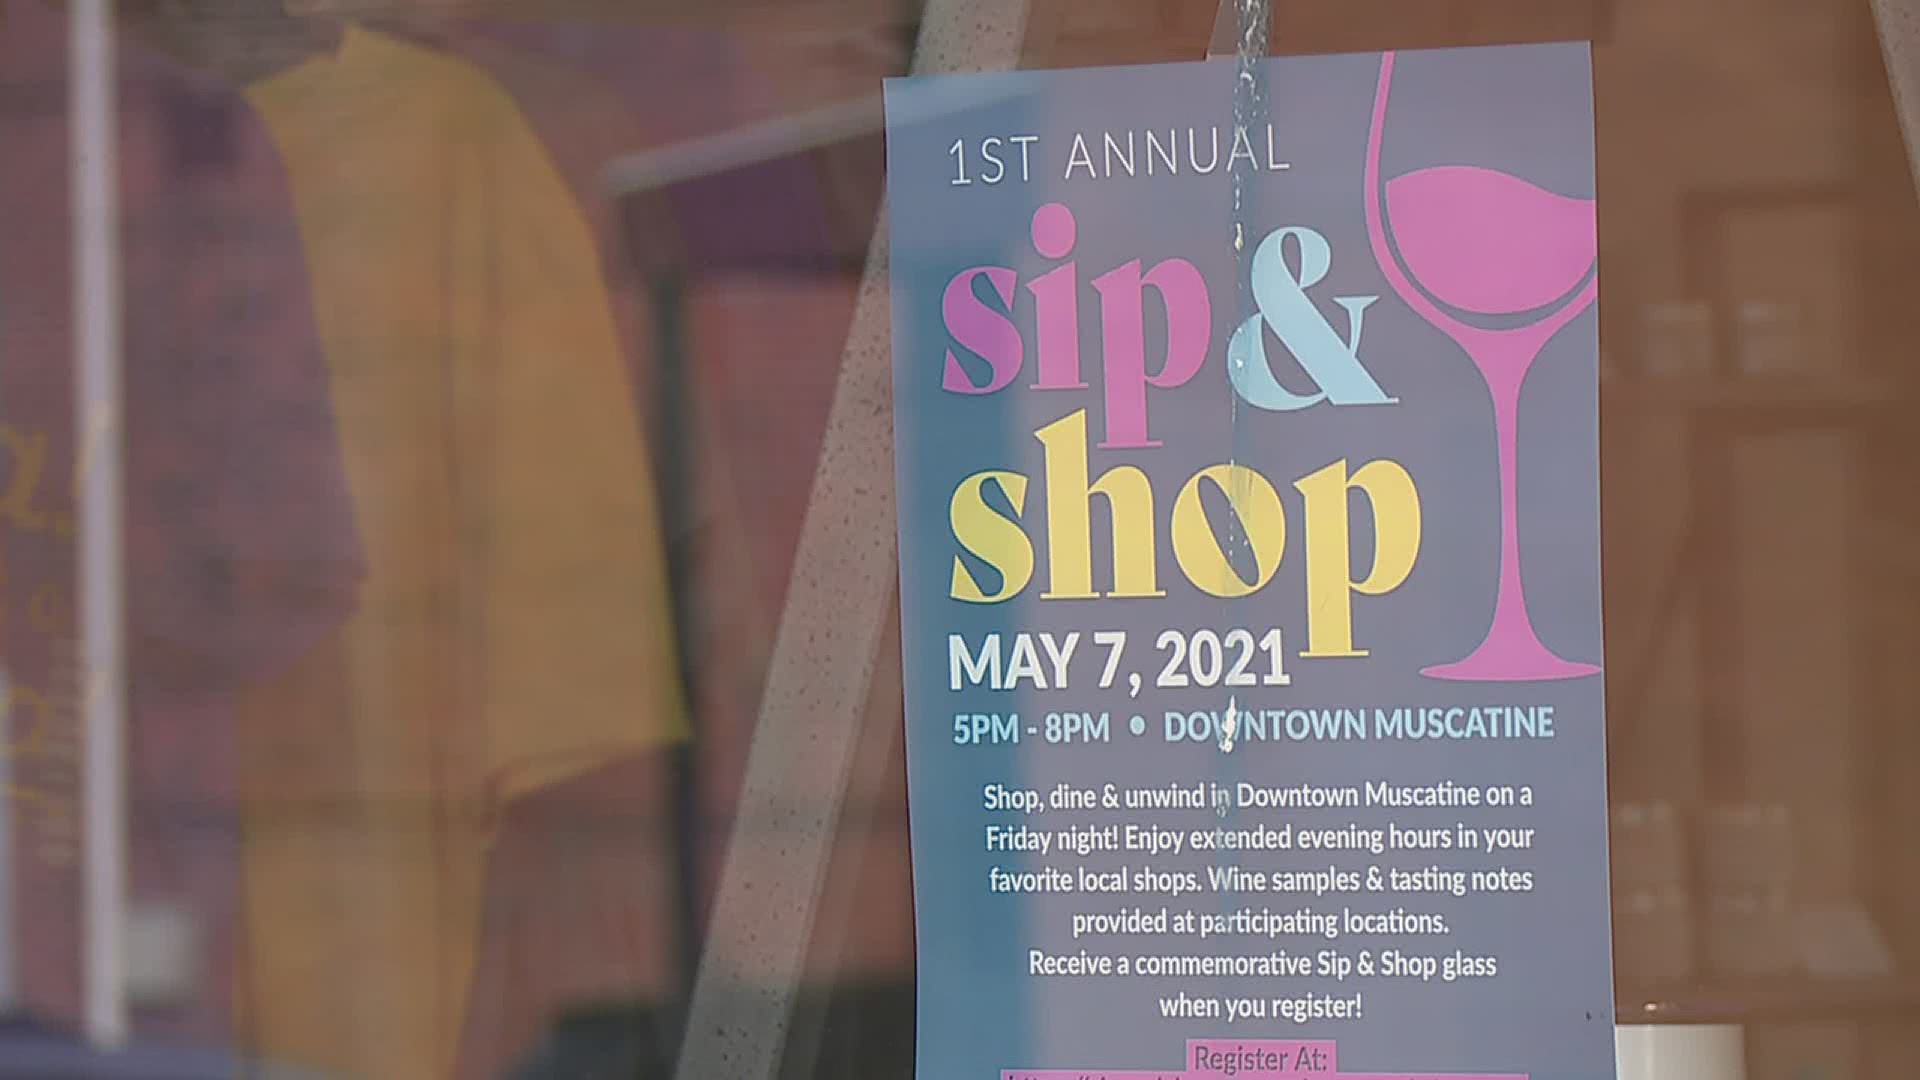 $25 tickets are still on sale for exclusive deals and wine samples from 19 Muscatine-owned businesses. The event will be on May 7th from 4:30 until 8pm.